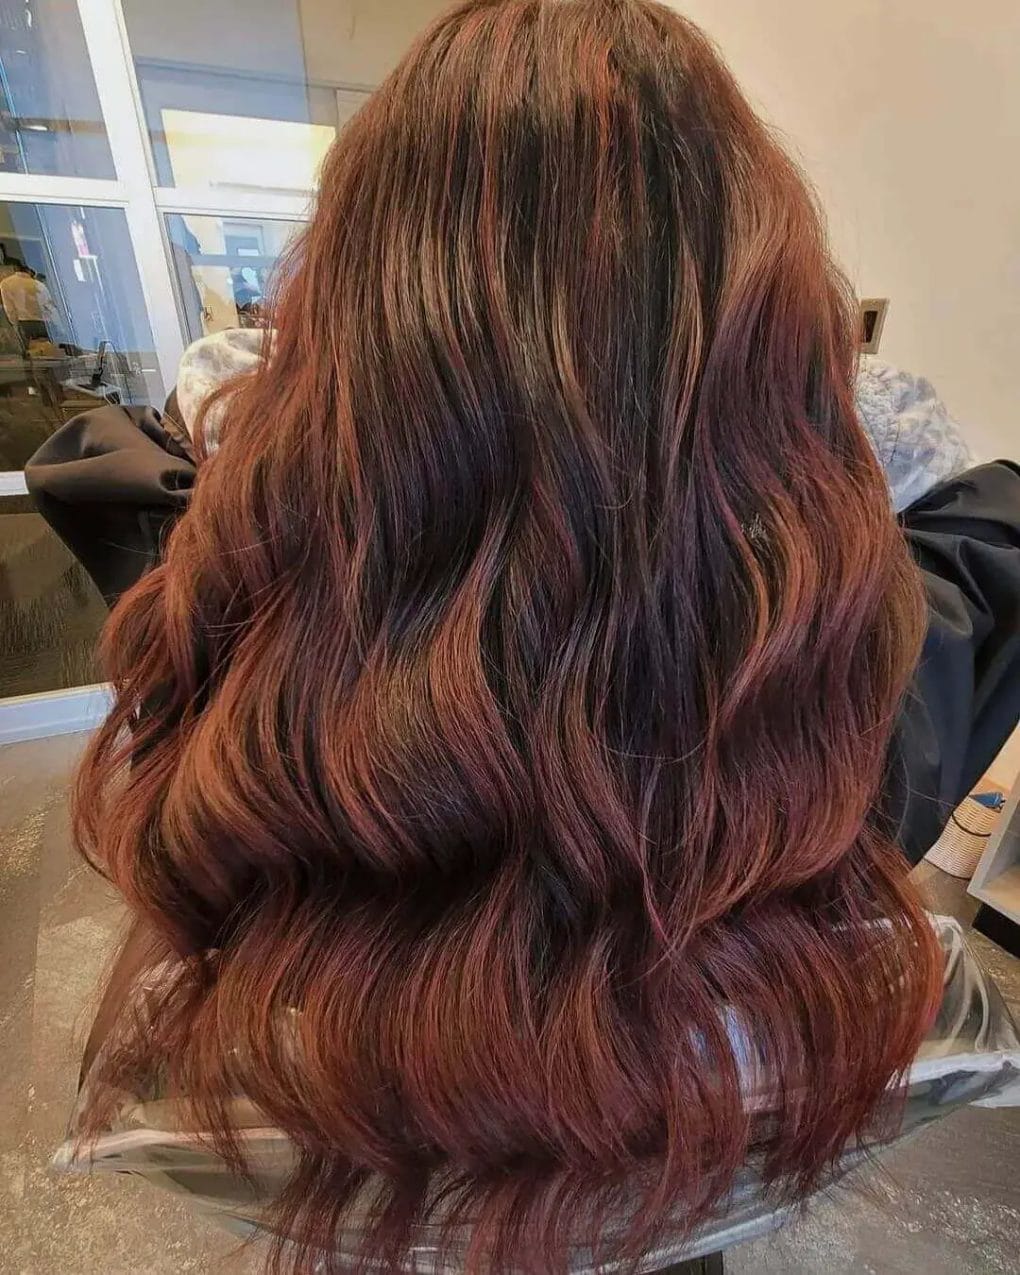 Seamless red to auburn balayage on brunette, full-bodied layers.